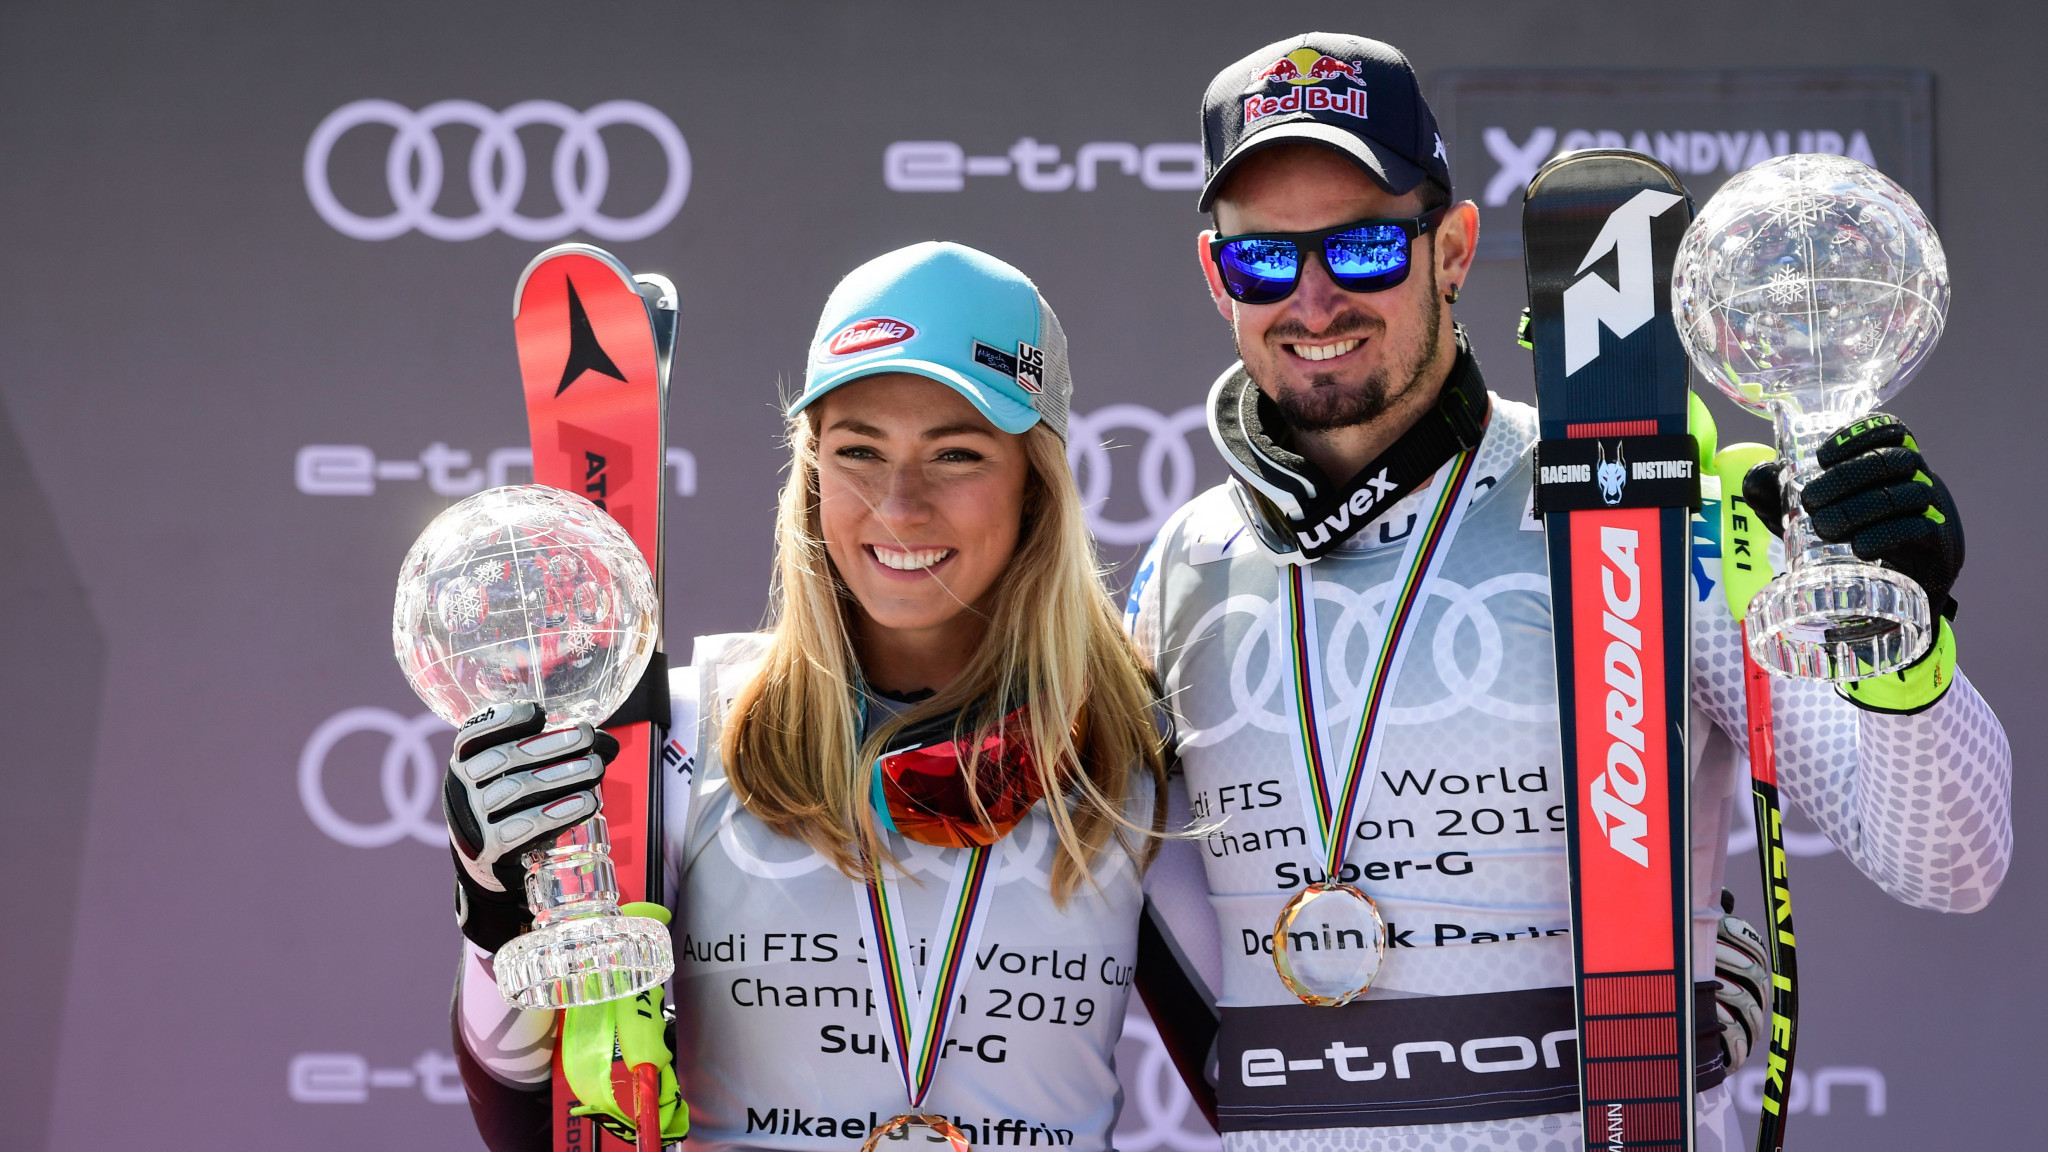 Shiffrin and Paris secure super-G globes at FIS Alpine Skiing World Cup Finals in Andorra